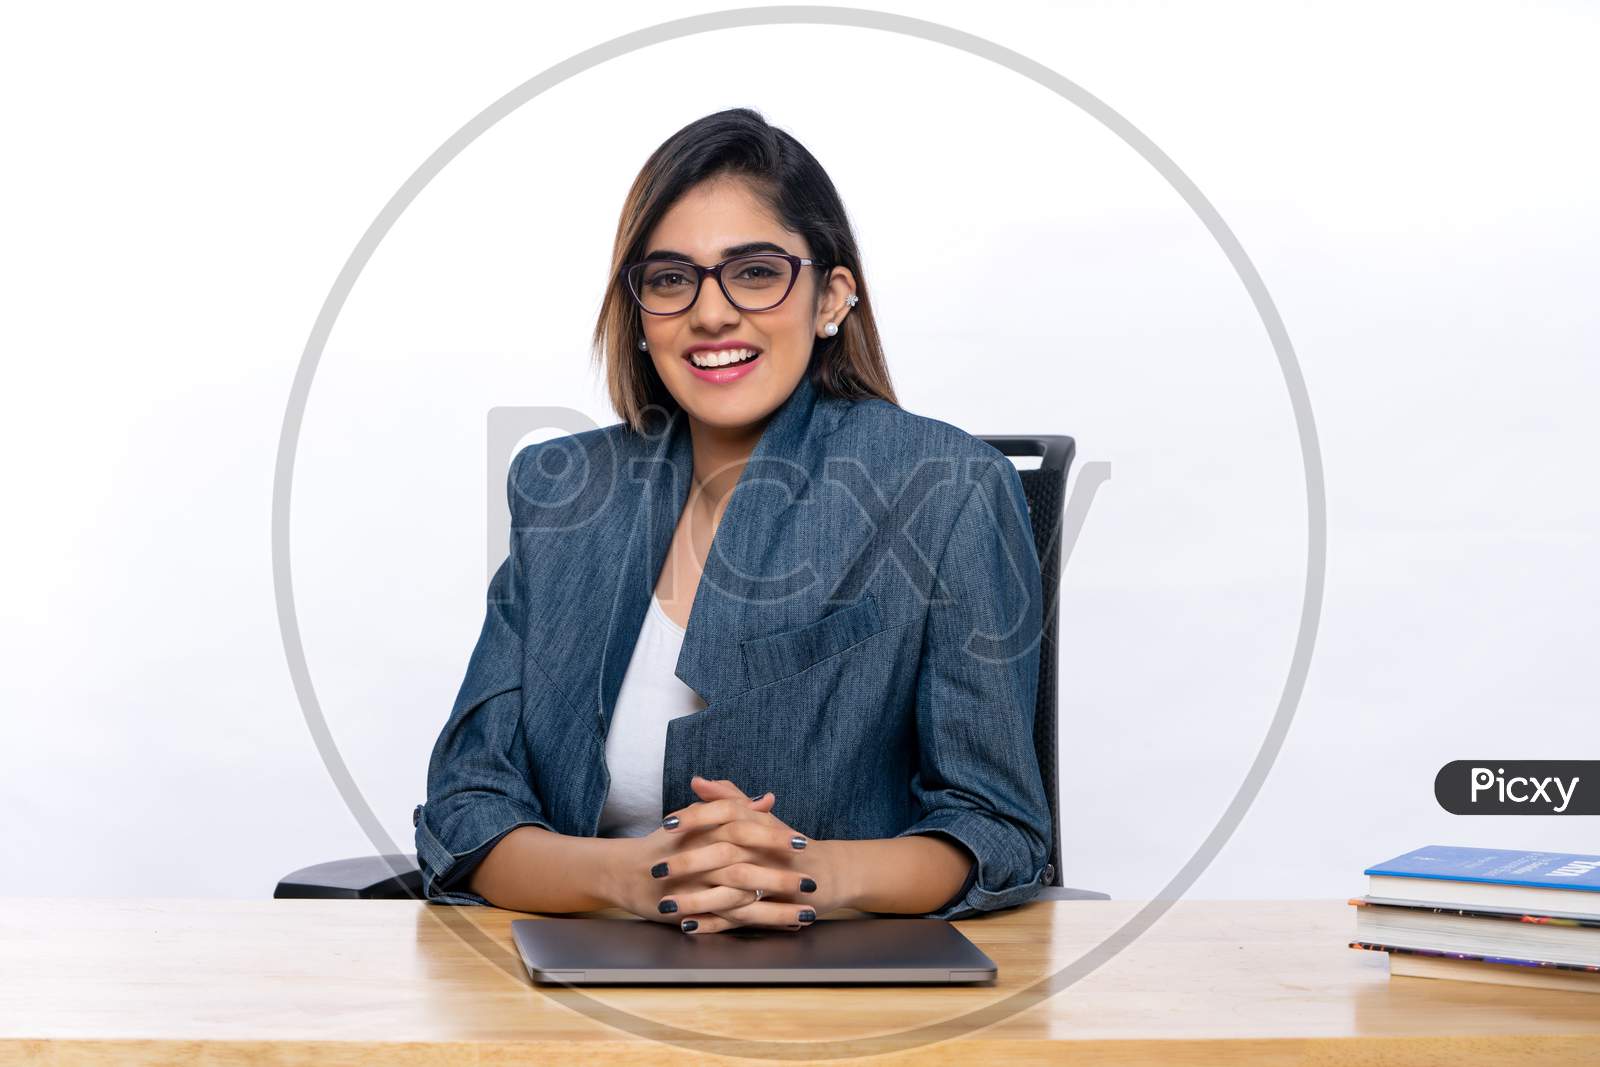 Smiling Indian confident young woman working with a Laptop